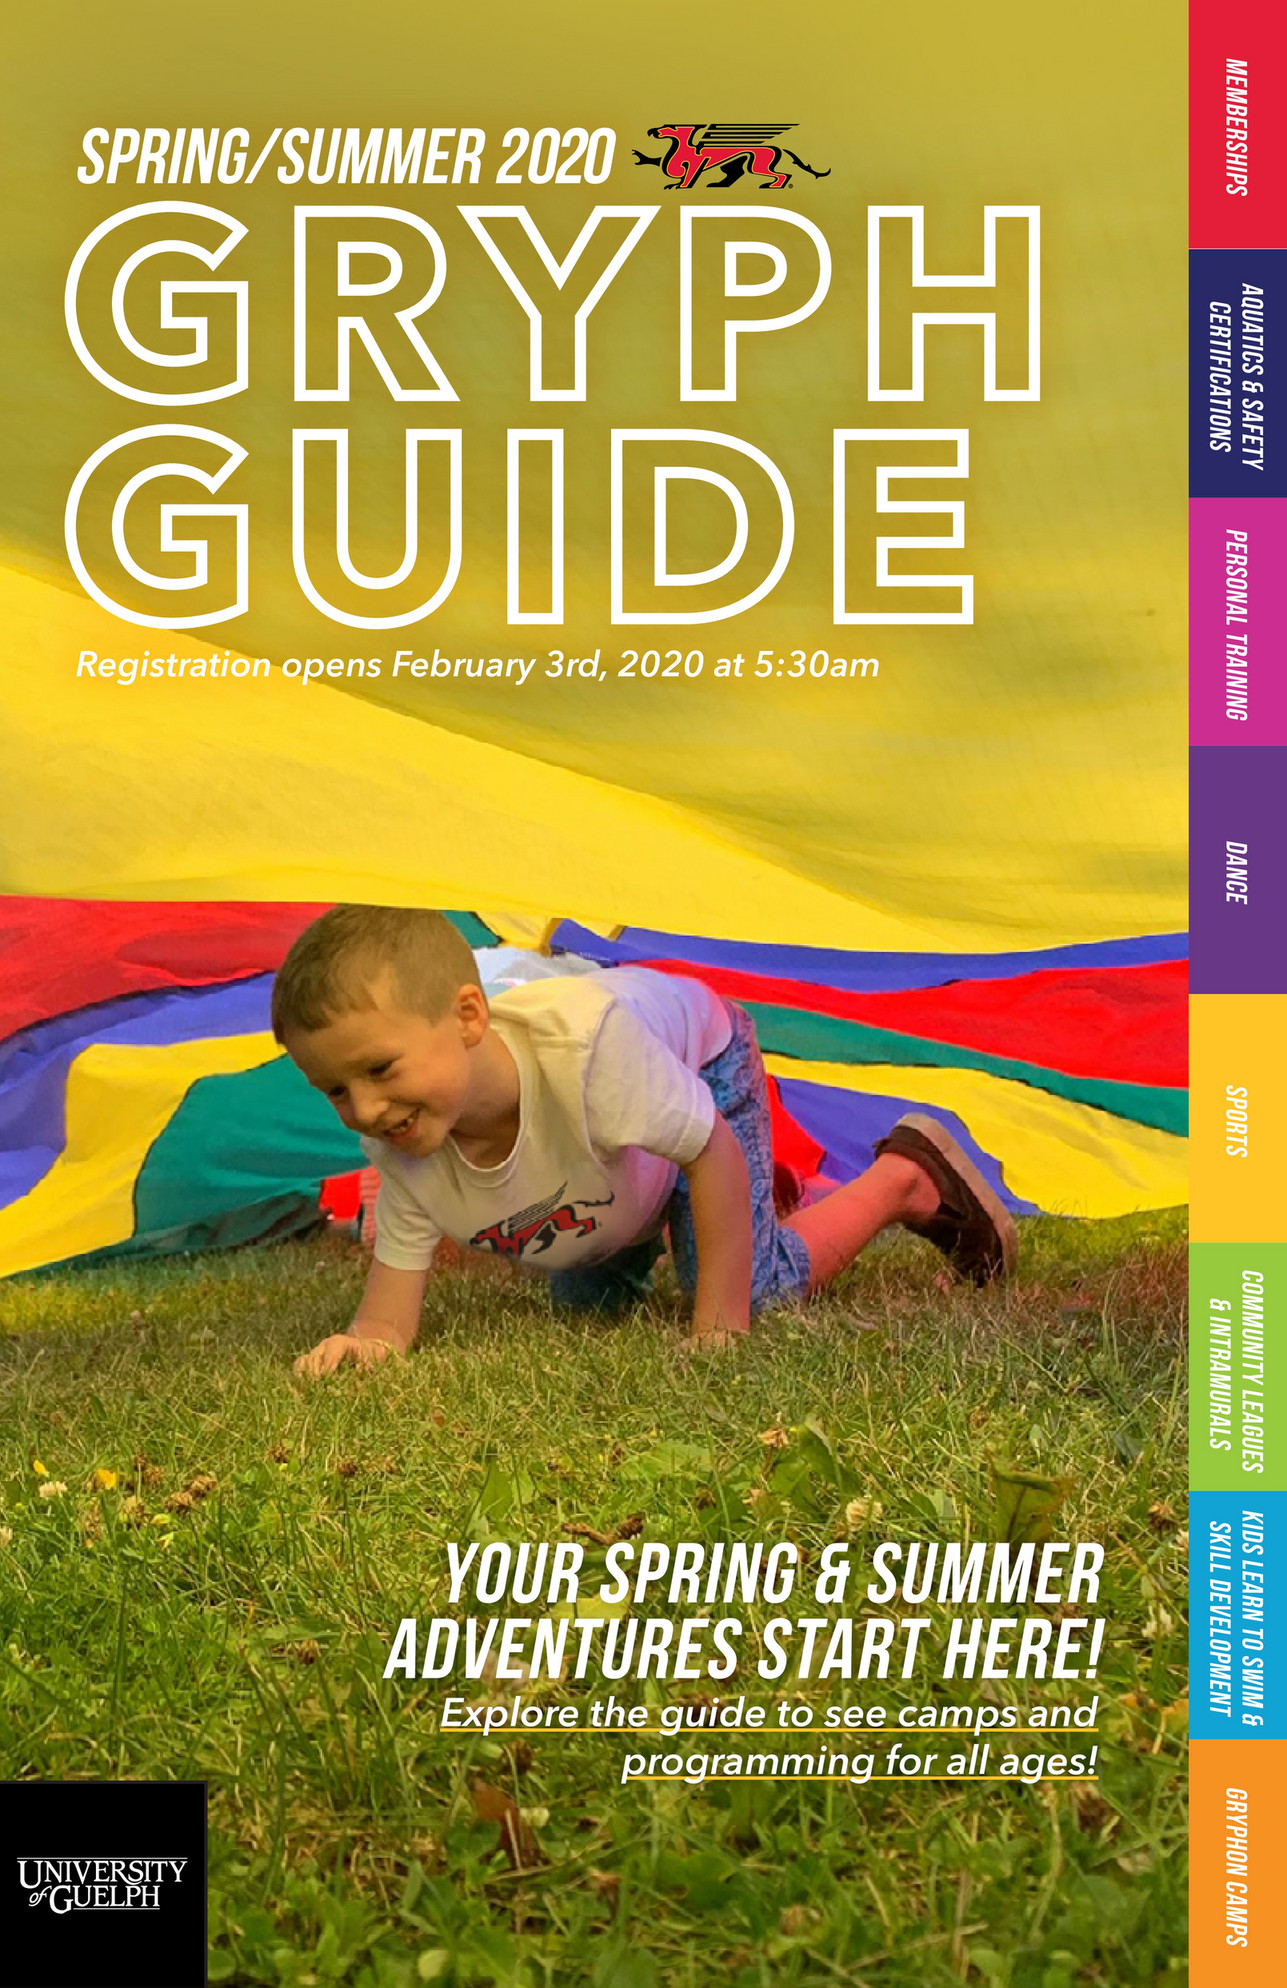 University of Guelph Guelph Gryphons Spring/Summer 2020 Gryph Guide